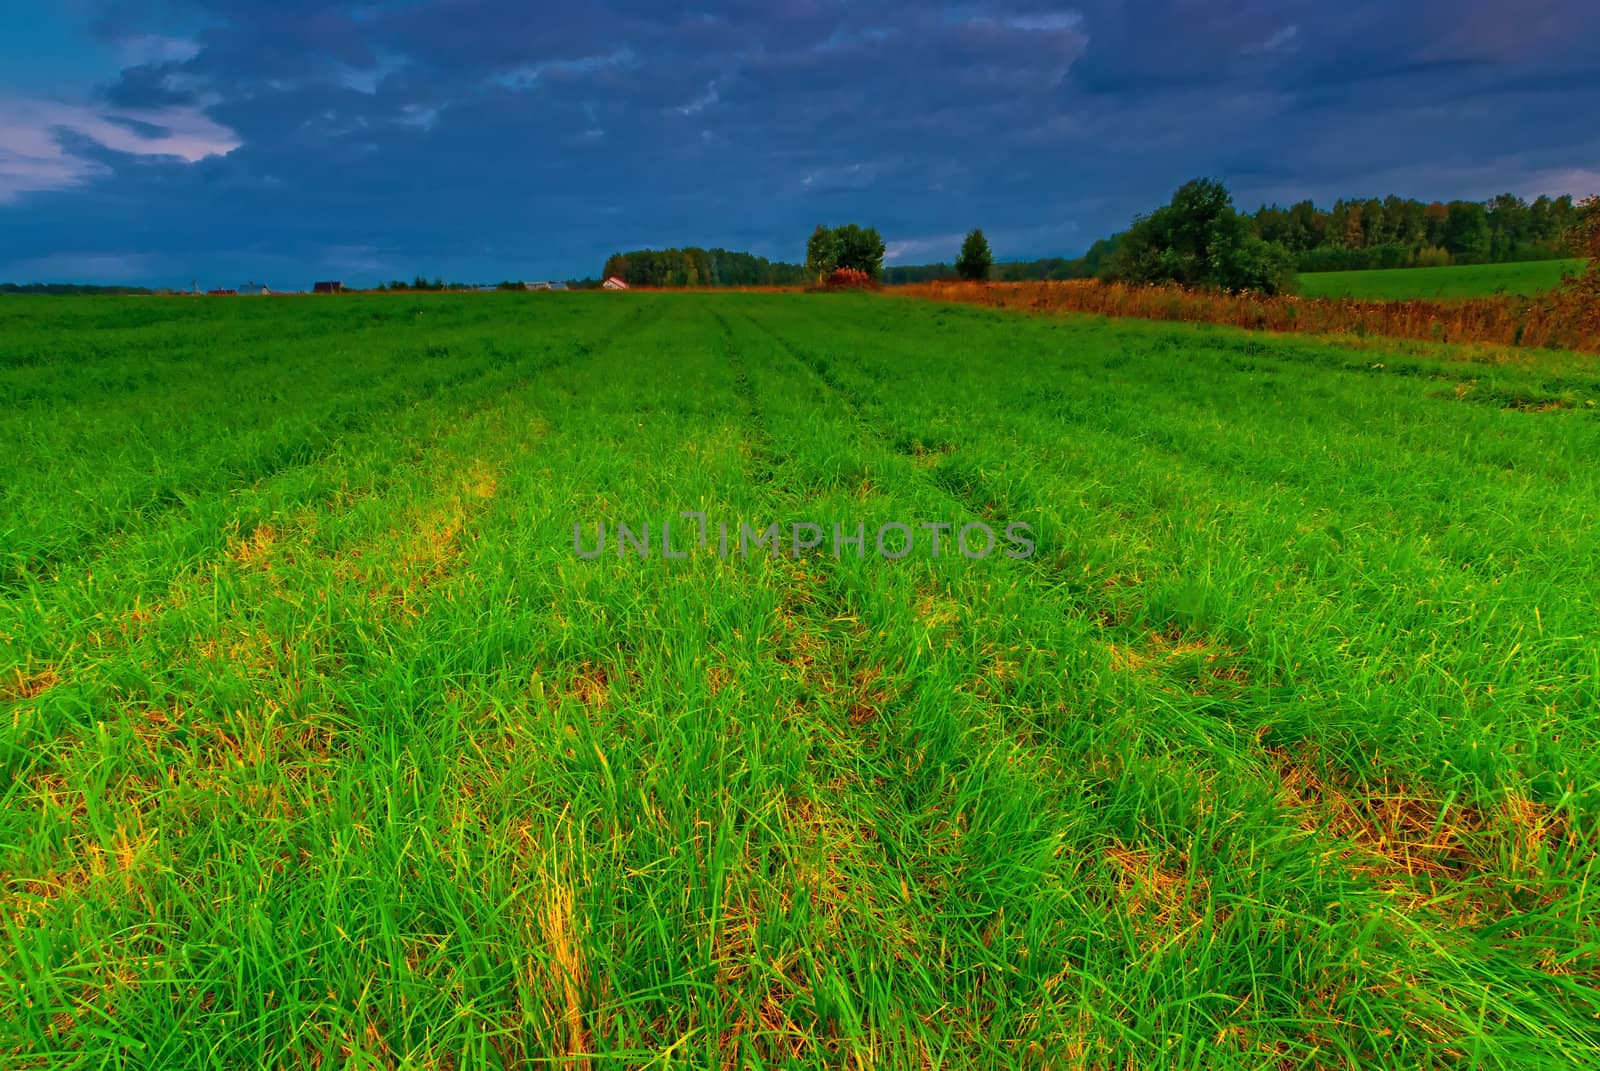 Green grass in a field in the early morning